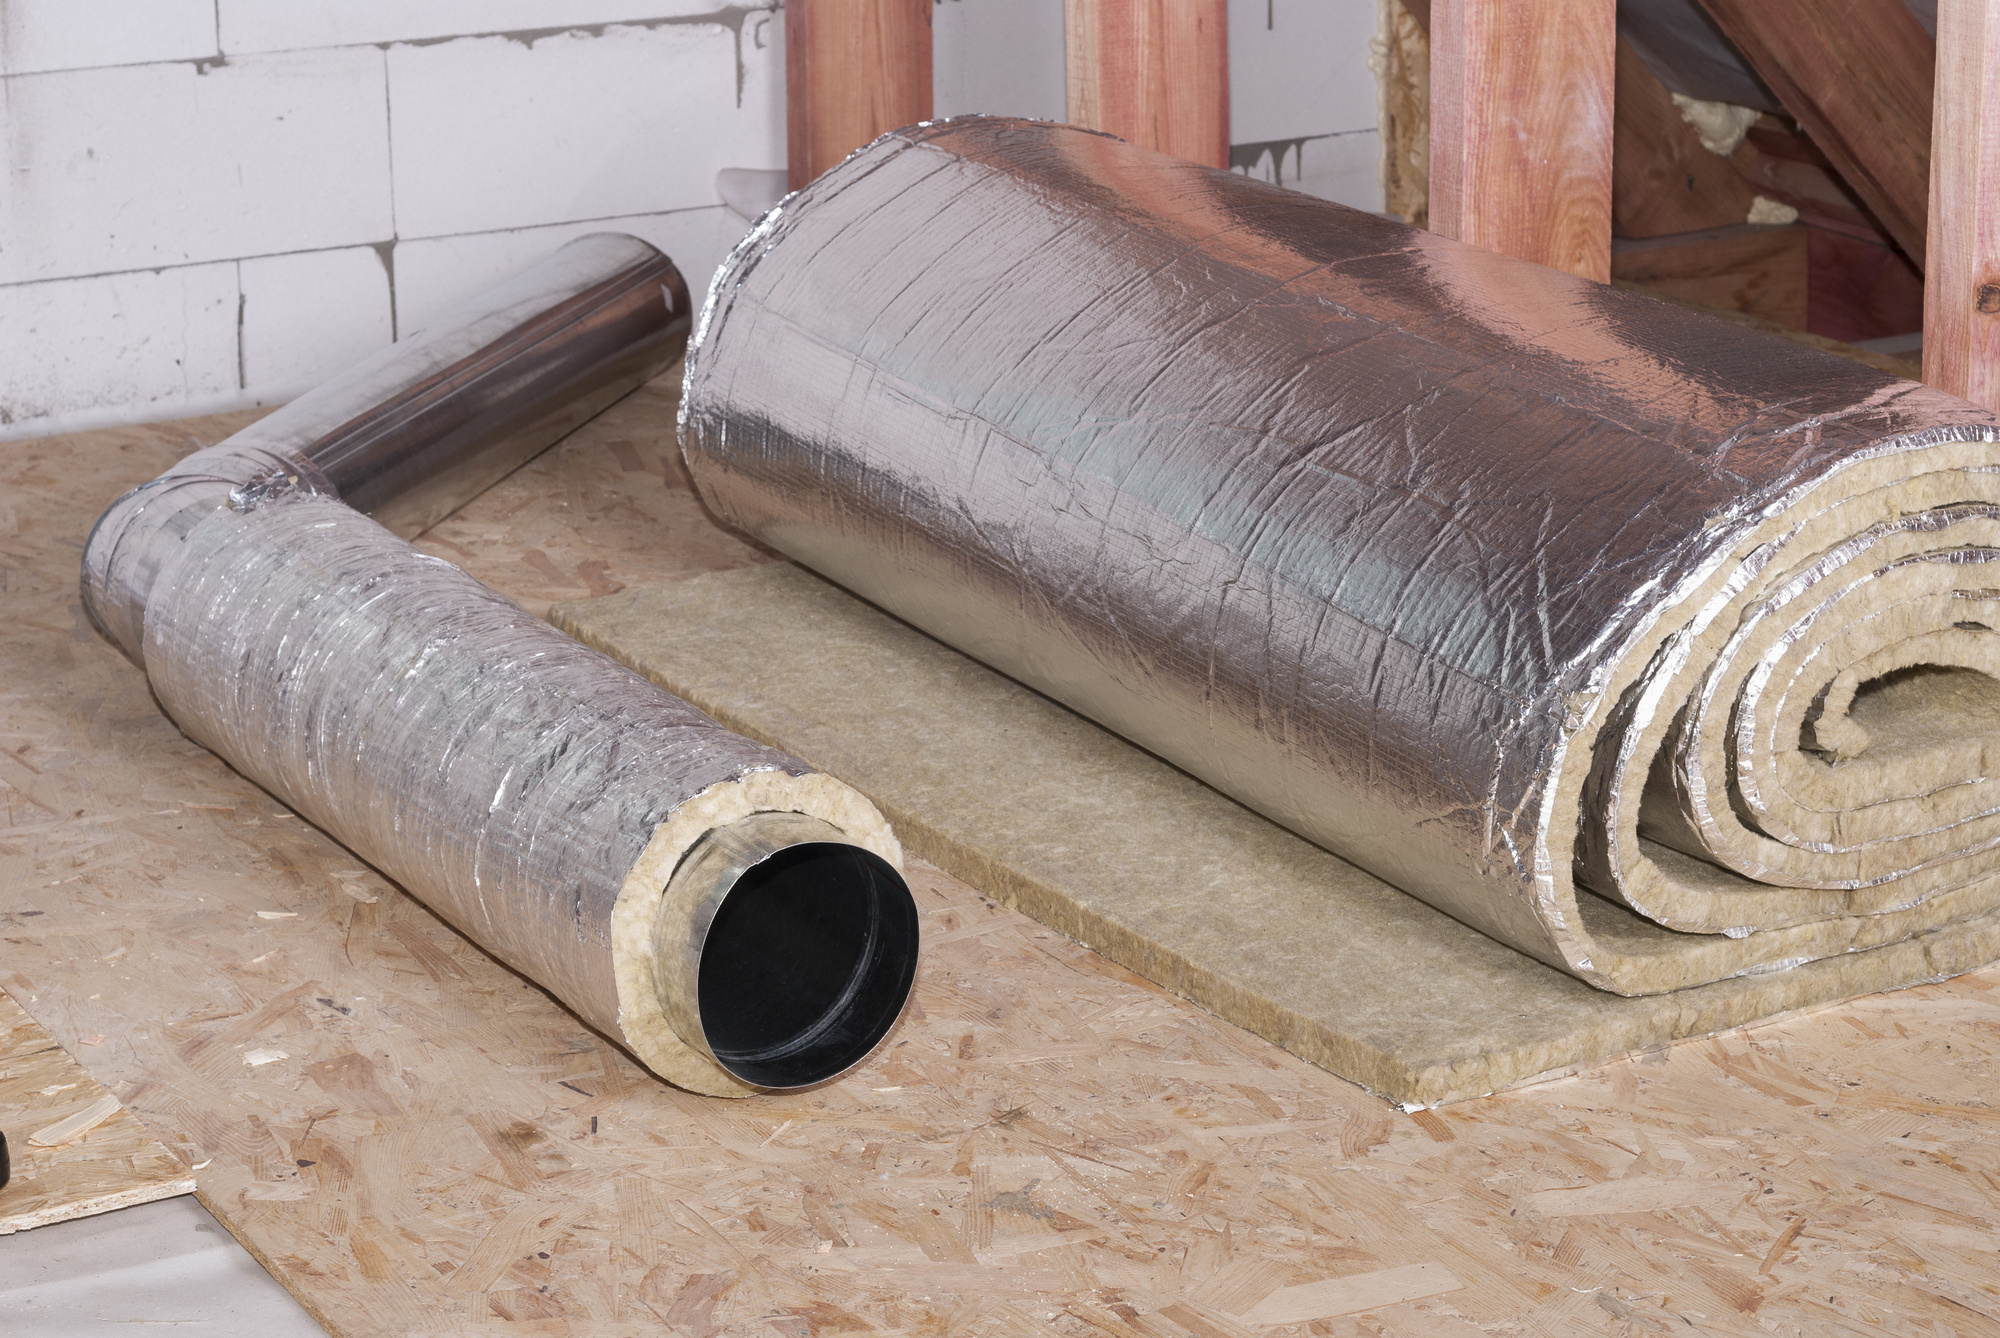 pipe insulation in crawl space